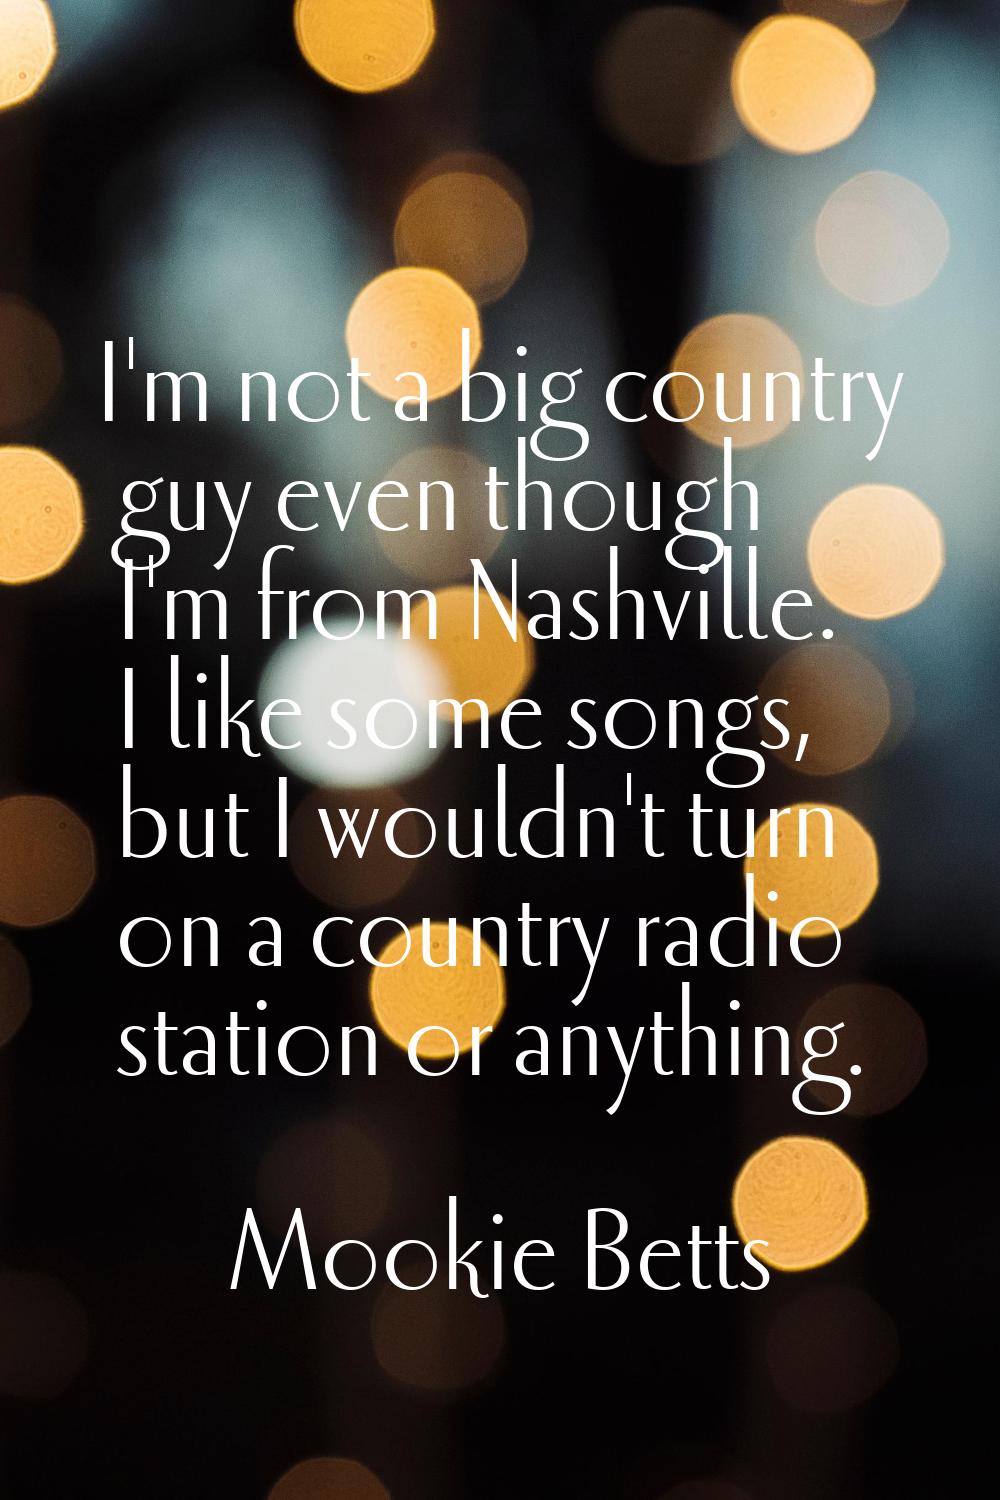 I'm not a big country guy even though I'm from Nashville. I like some songs, but I wouldn't turn on